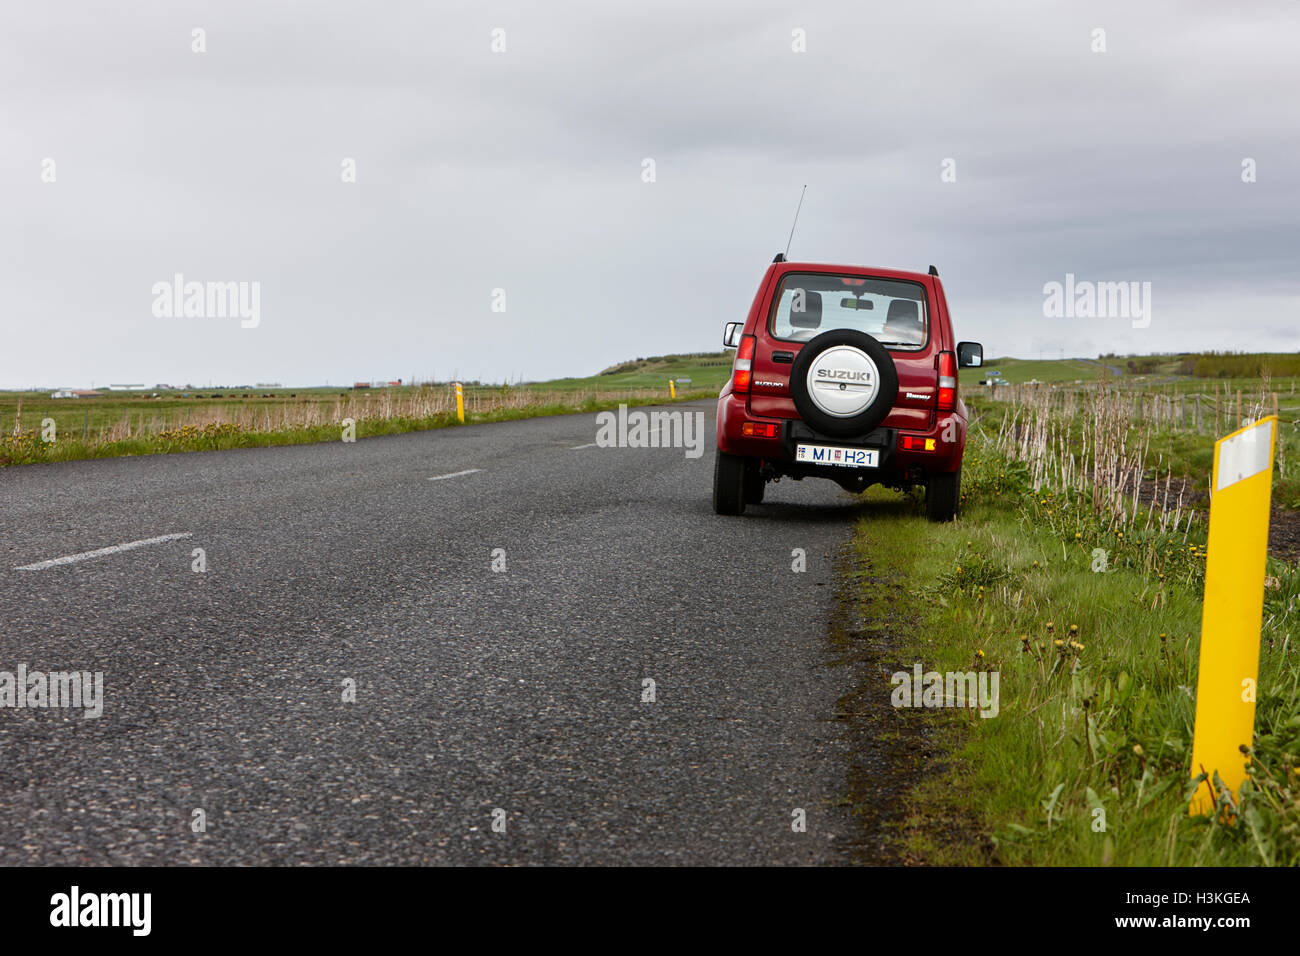 tourist hired small 4x4 vehicle temporarily parked at the side of the road Hlidarendi Hvolsvollur Iceland Stock Photo